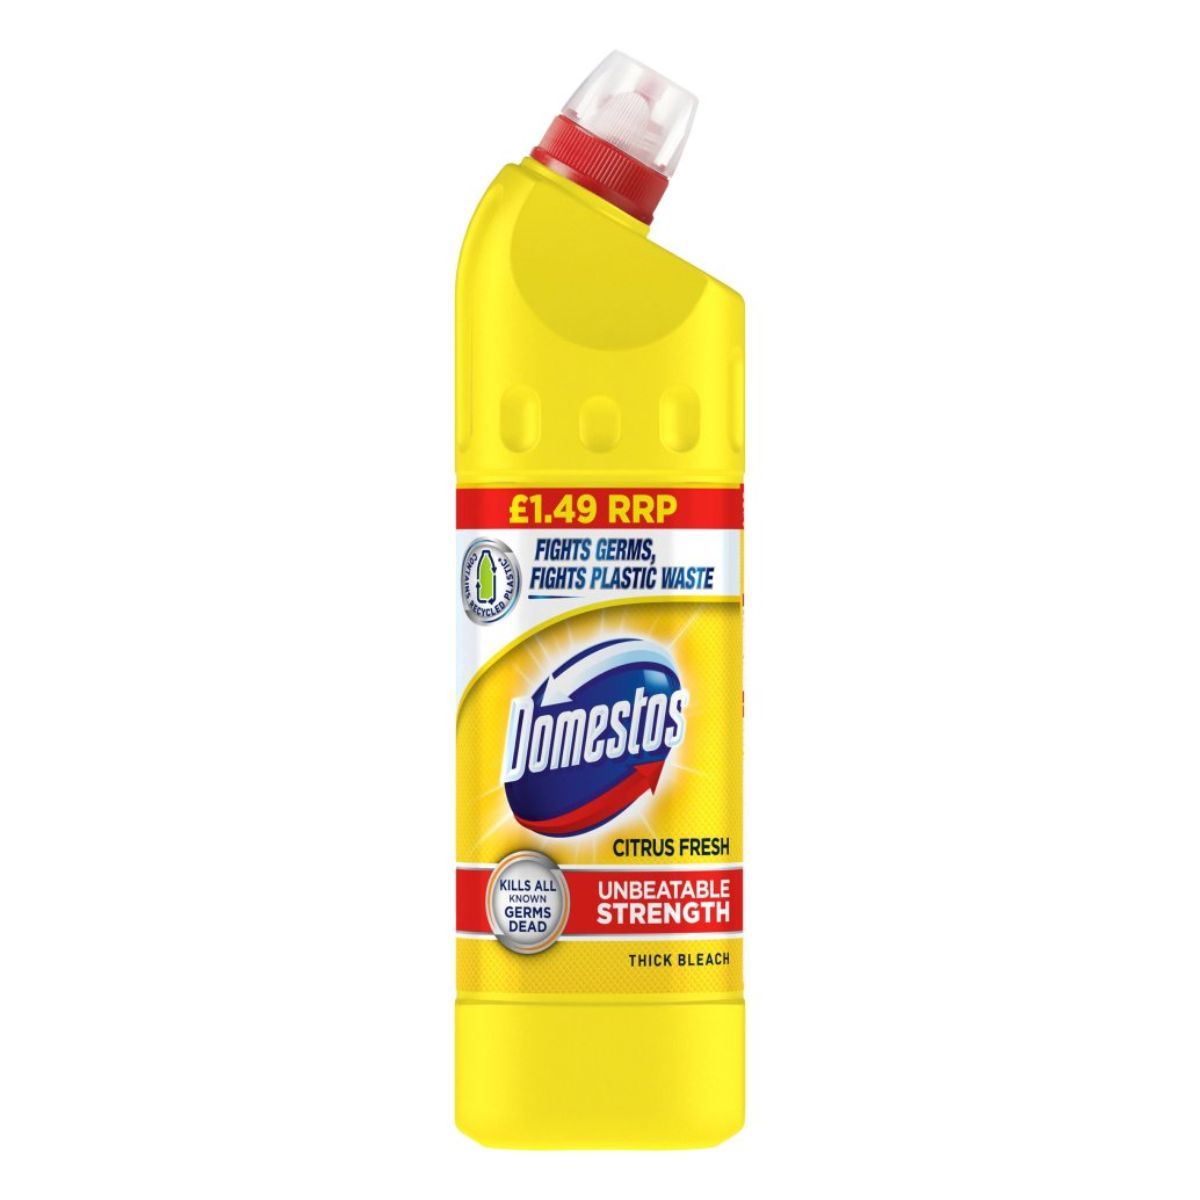 A bottle of Domestos - Thick Bleach Citrus Fresh - 750ml on a white background.